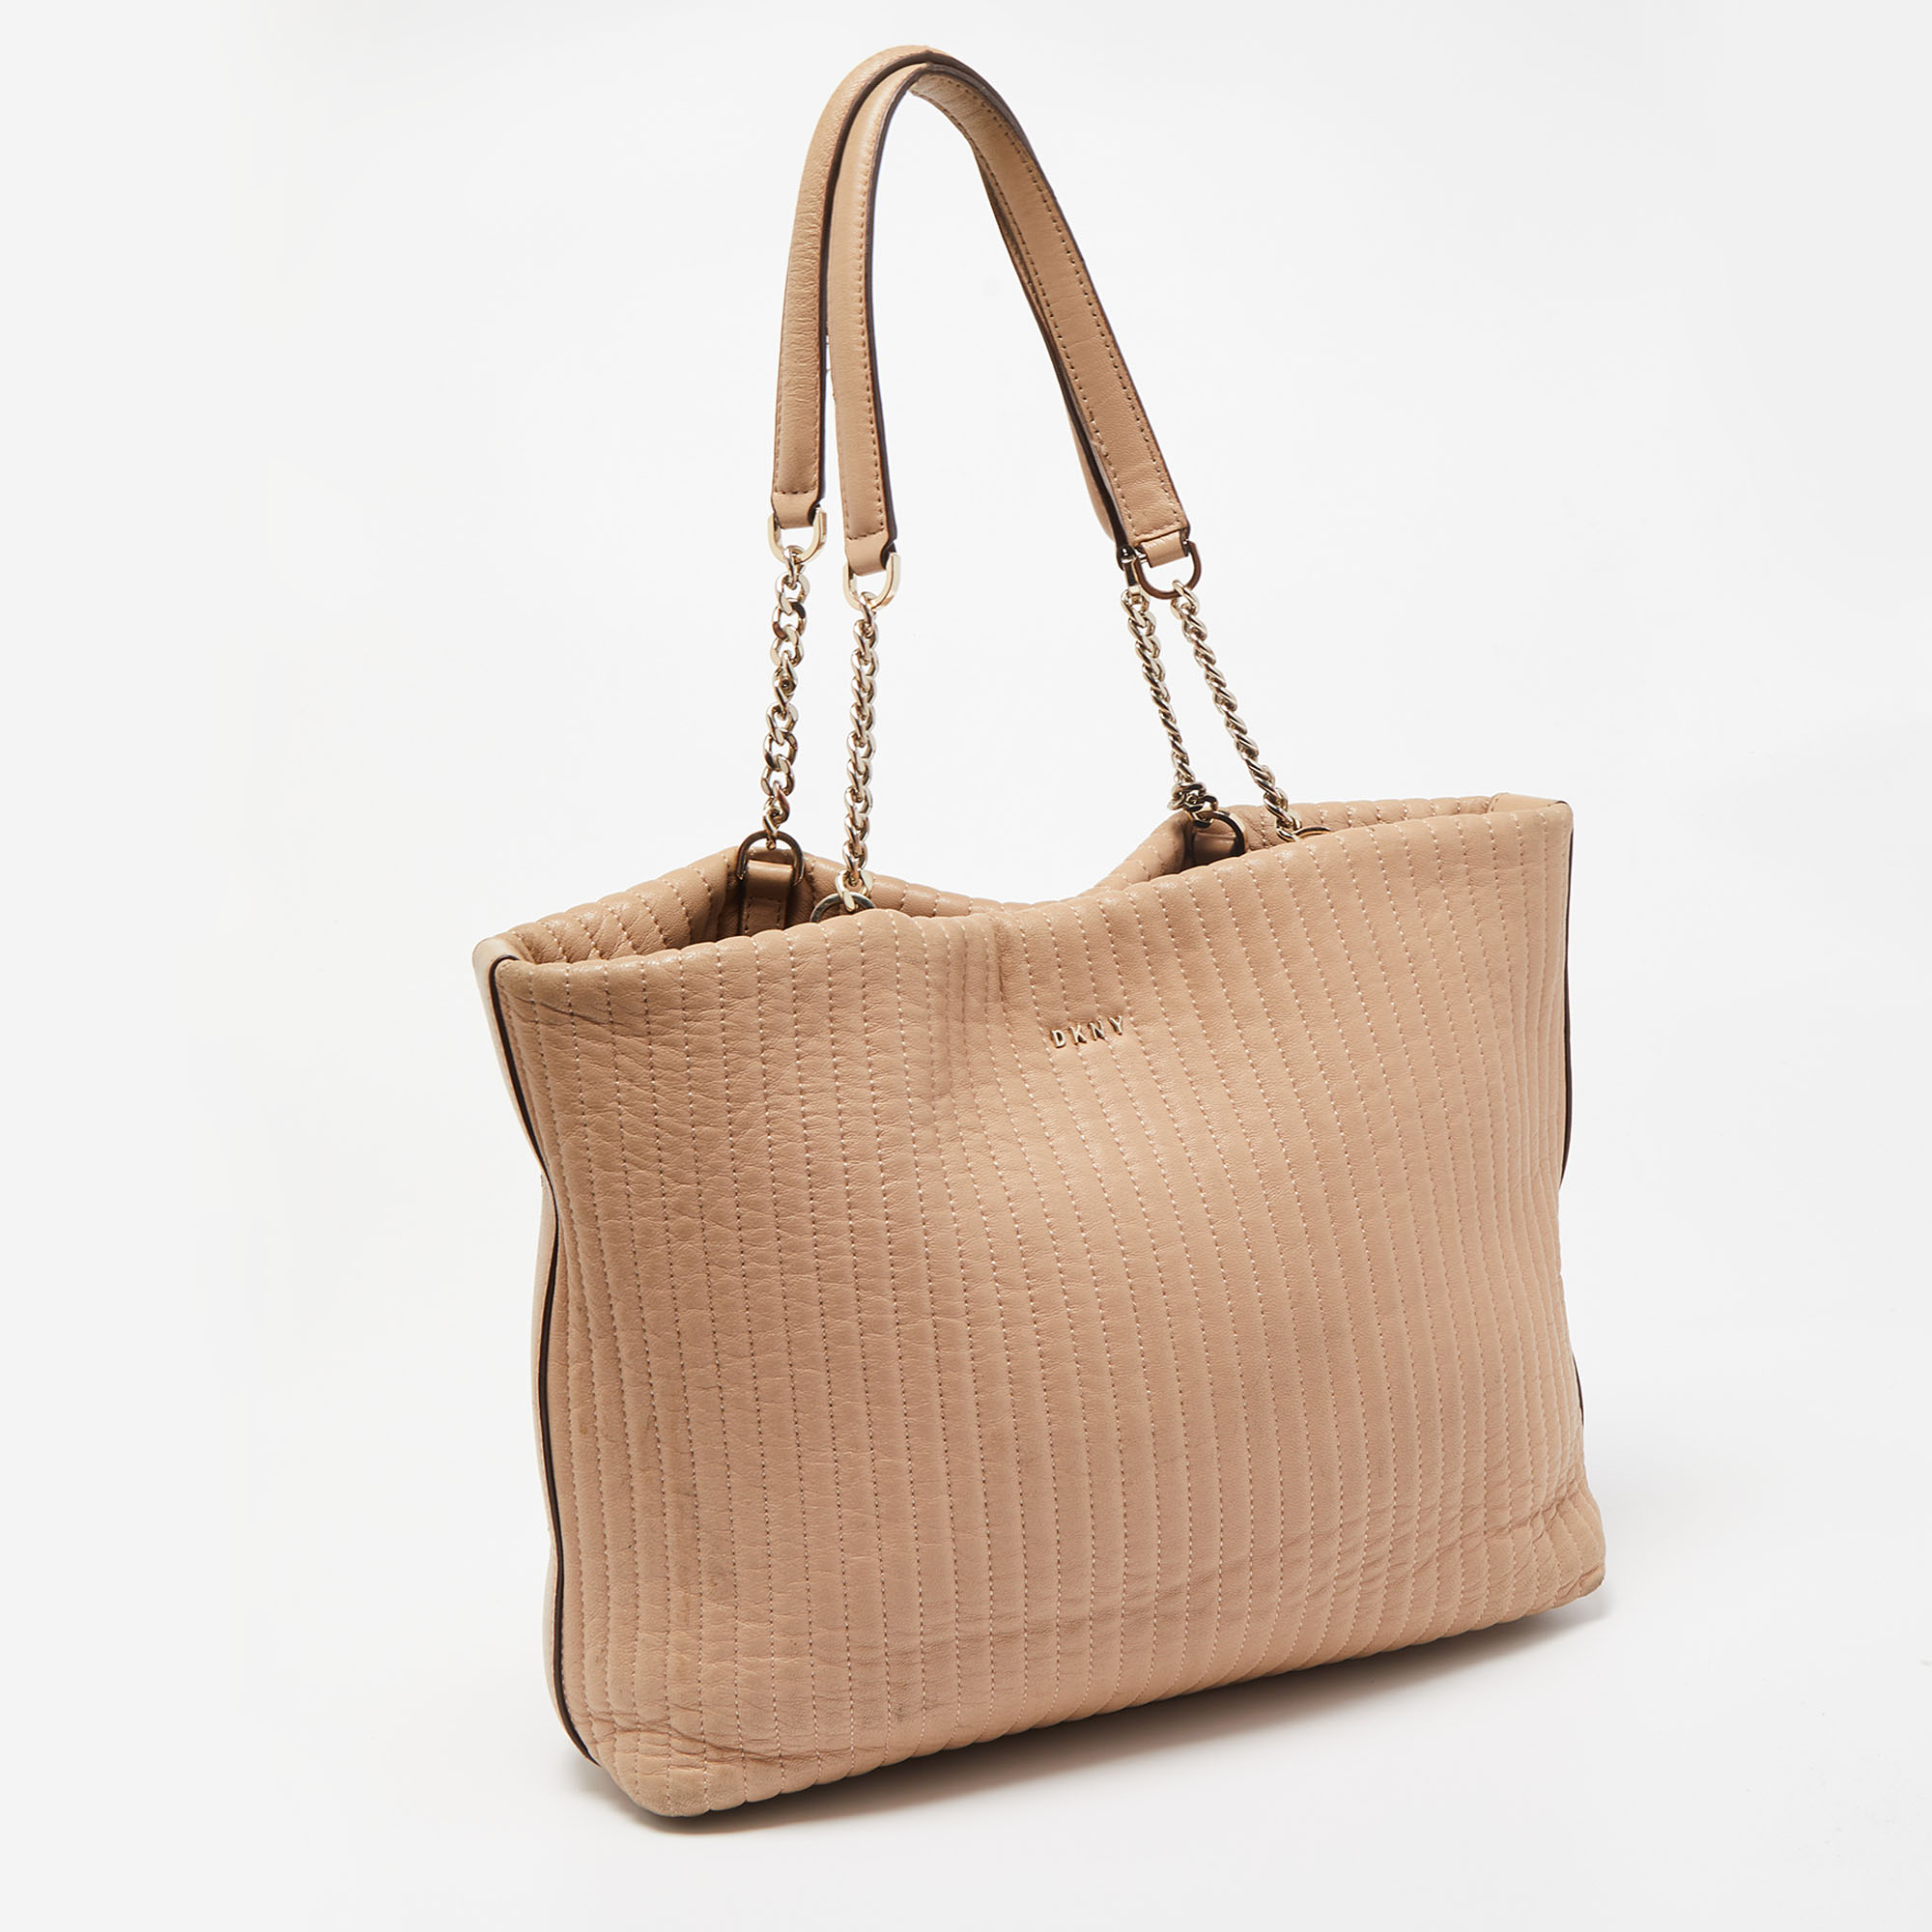 DKNY Beige Quilted Leather Chain Tote